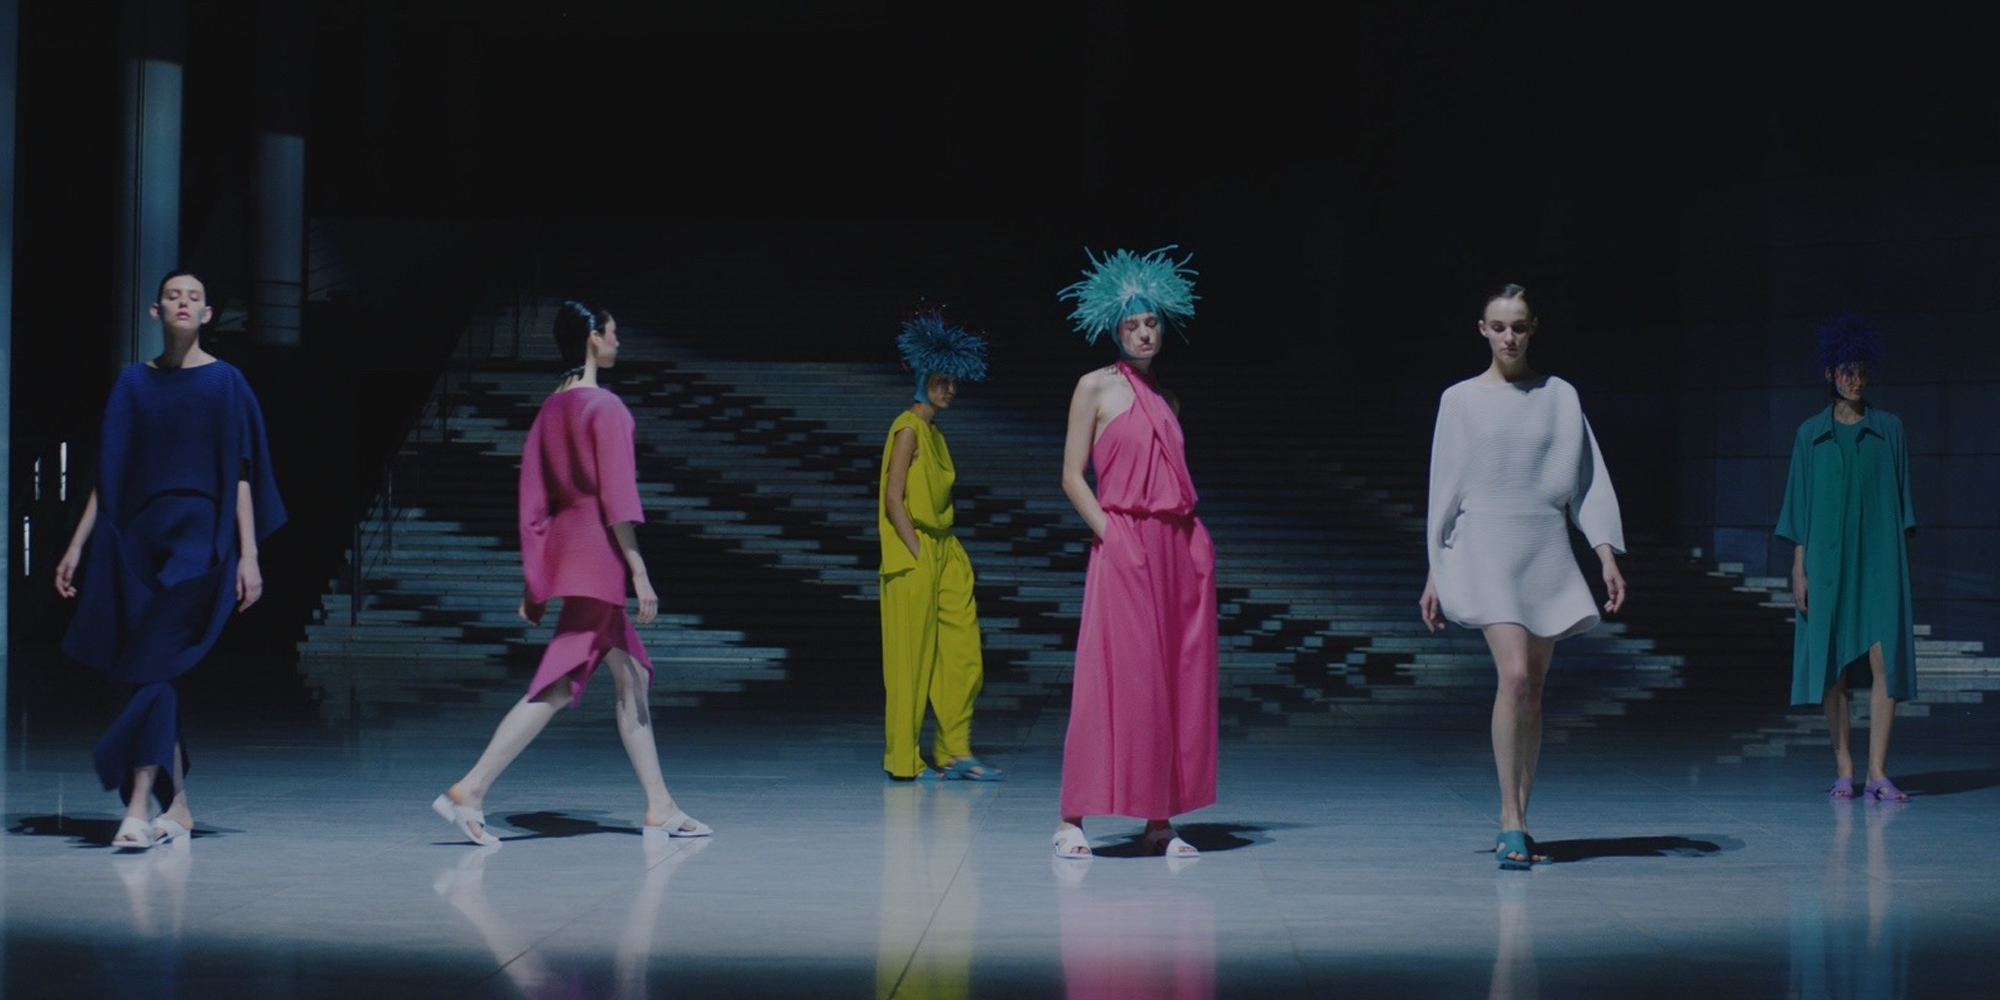 ISSEY MIYAKE SPRING 2022 RTW COLLECTION1